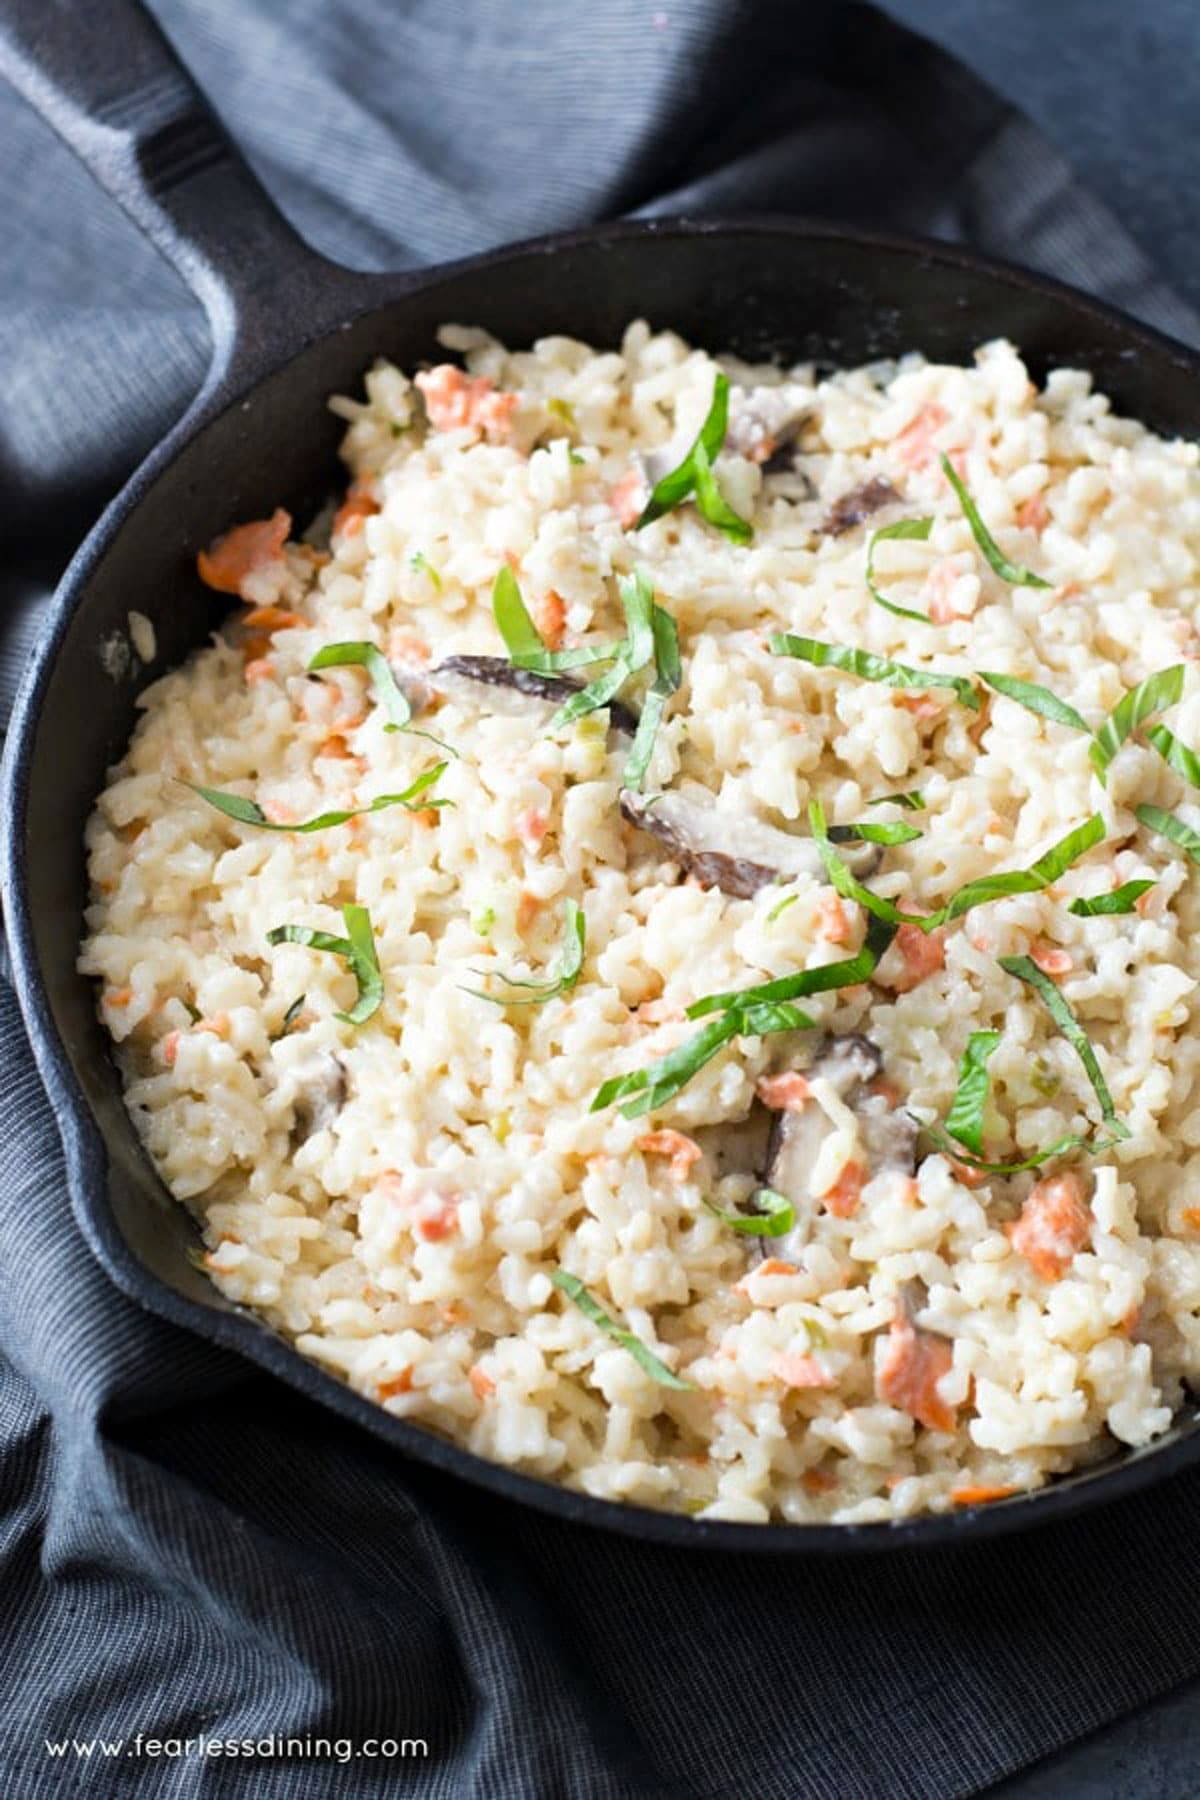 A skillet full of smoked salmon risotto.